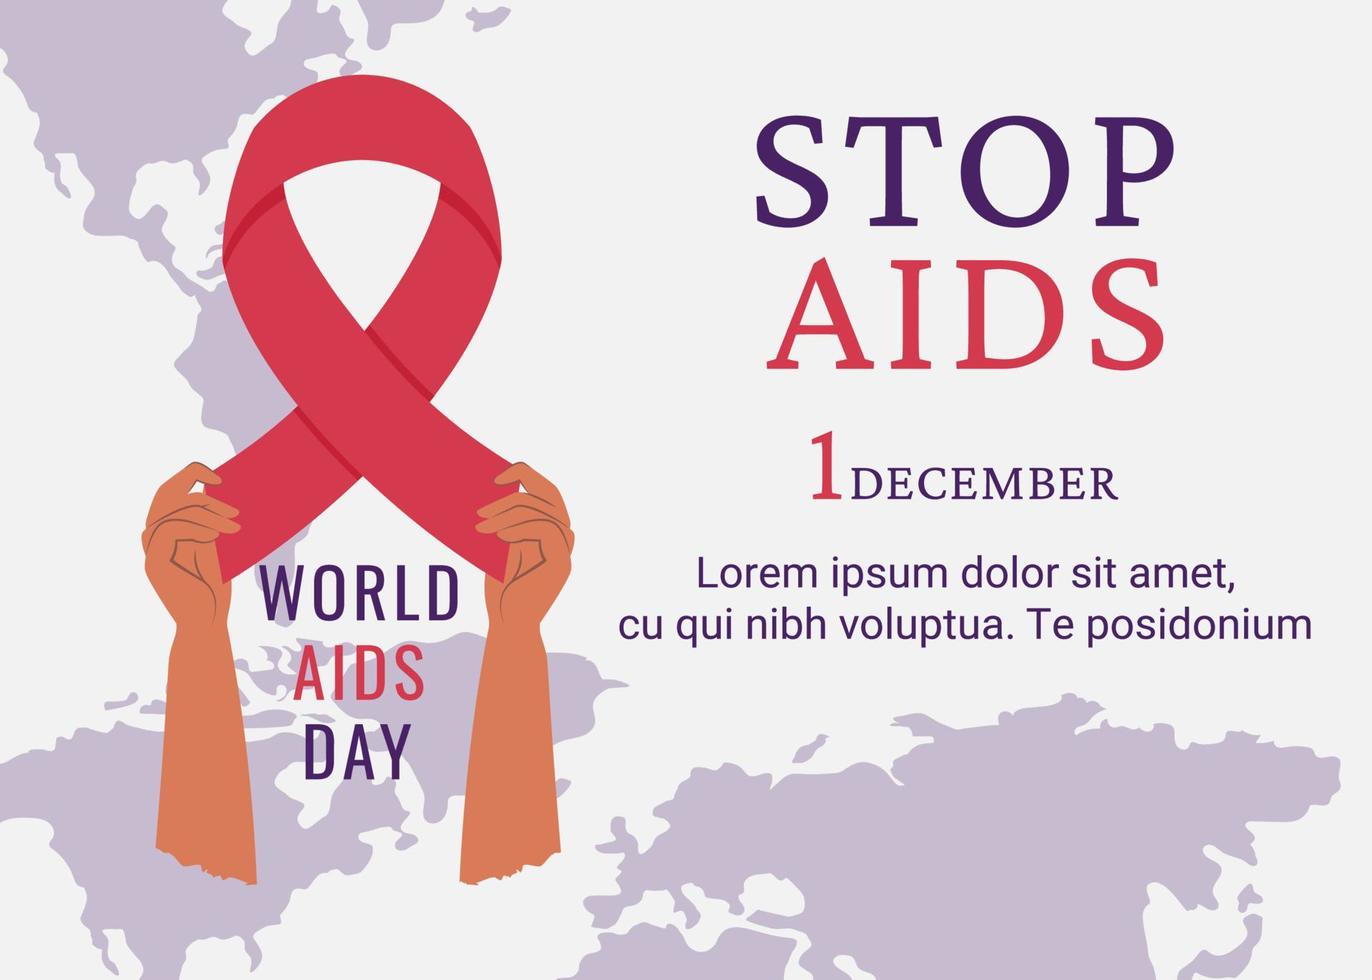 AIDS day banner. Human hands holding red AIDS ribbon. Awareness of AIDS. Support for hiv infected people. Vector illustration